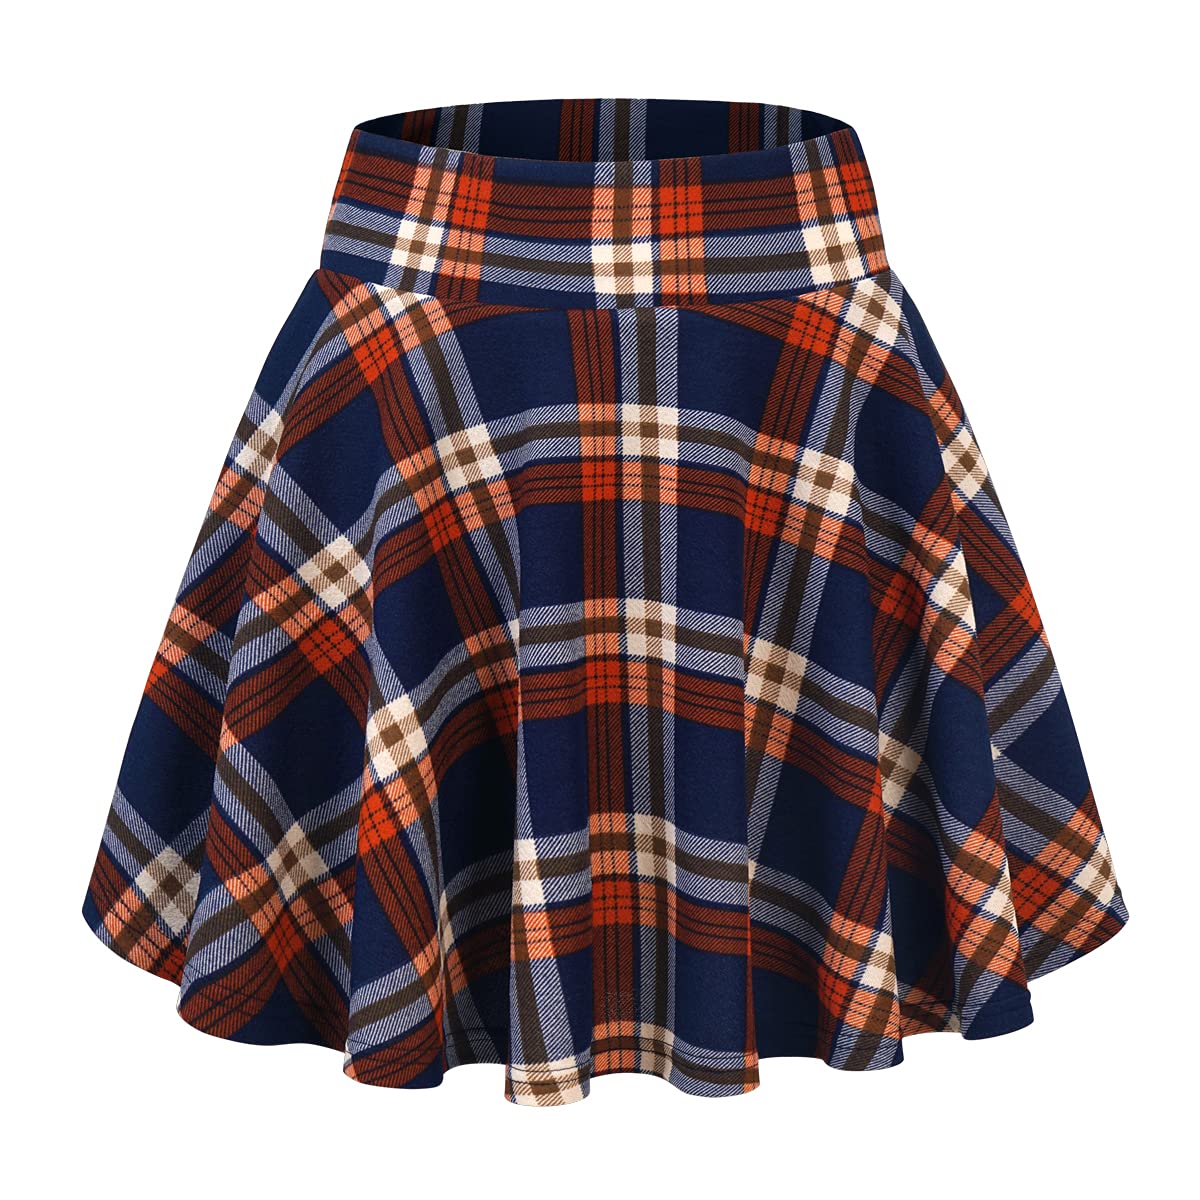 DJT Flared Pleated Red White Plaid Women's Casual Stretchy Mini Skater Skirt with Shorts